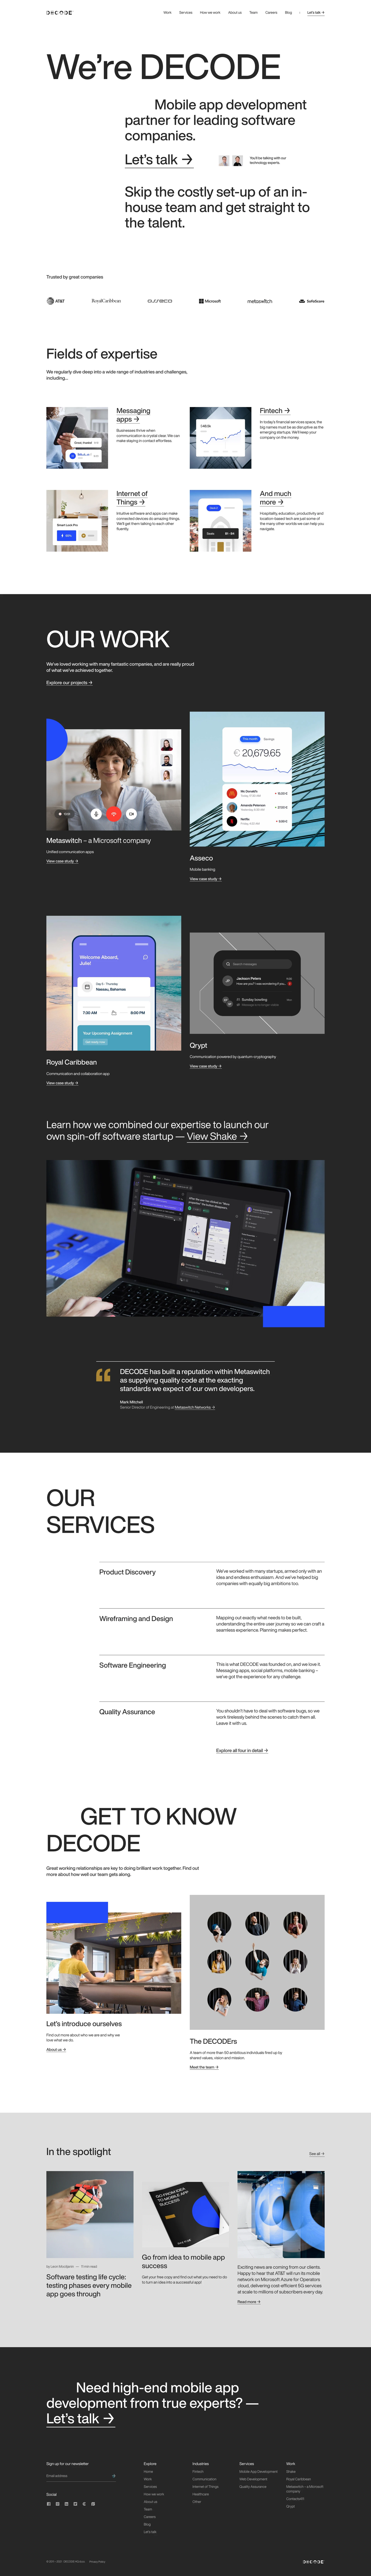 DECODE Landing Page Example: Mobile app development partner for leading software companies. Clients include the world’s leading telco software house Metaswitch (a Microsoft company), Europe’s TOP10 software vendor Asseco...